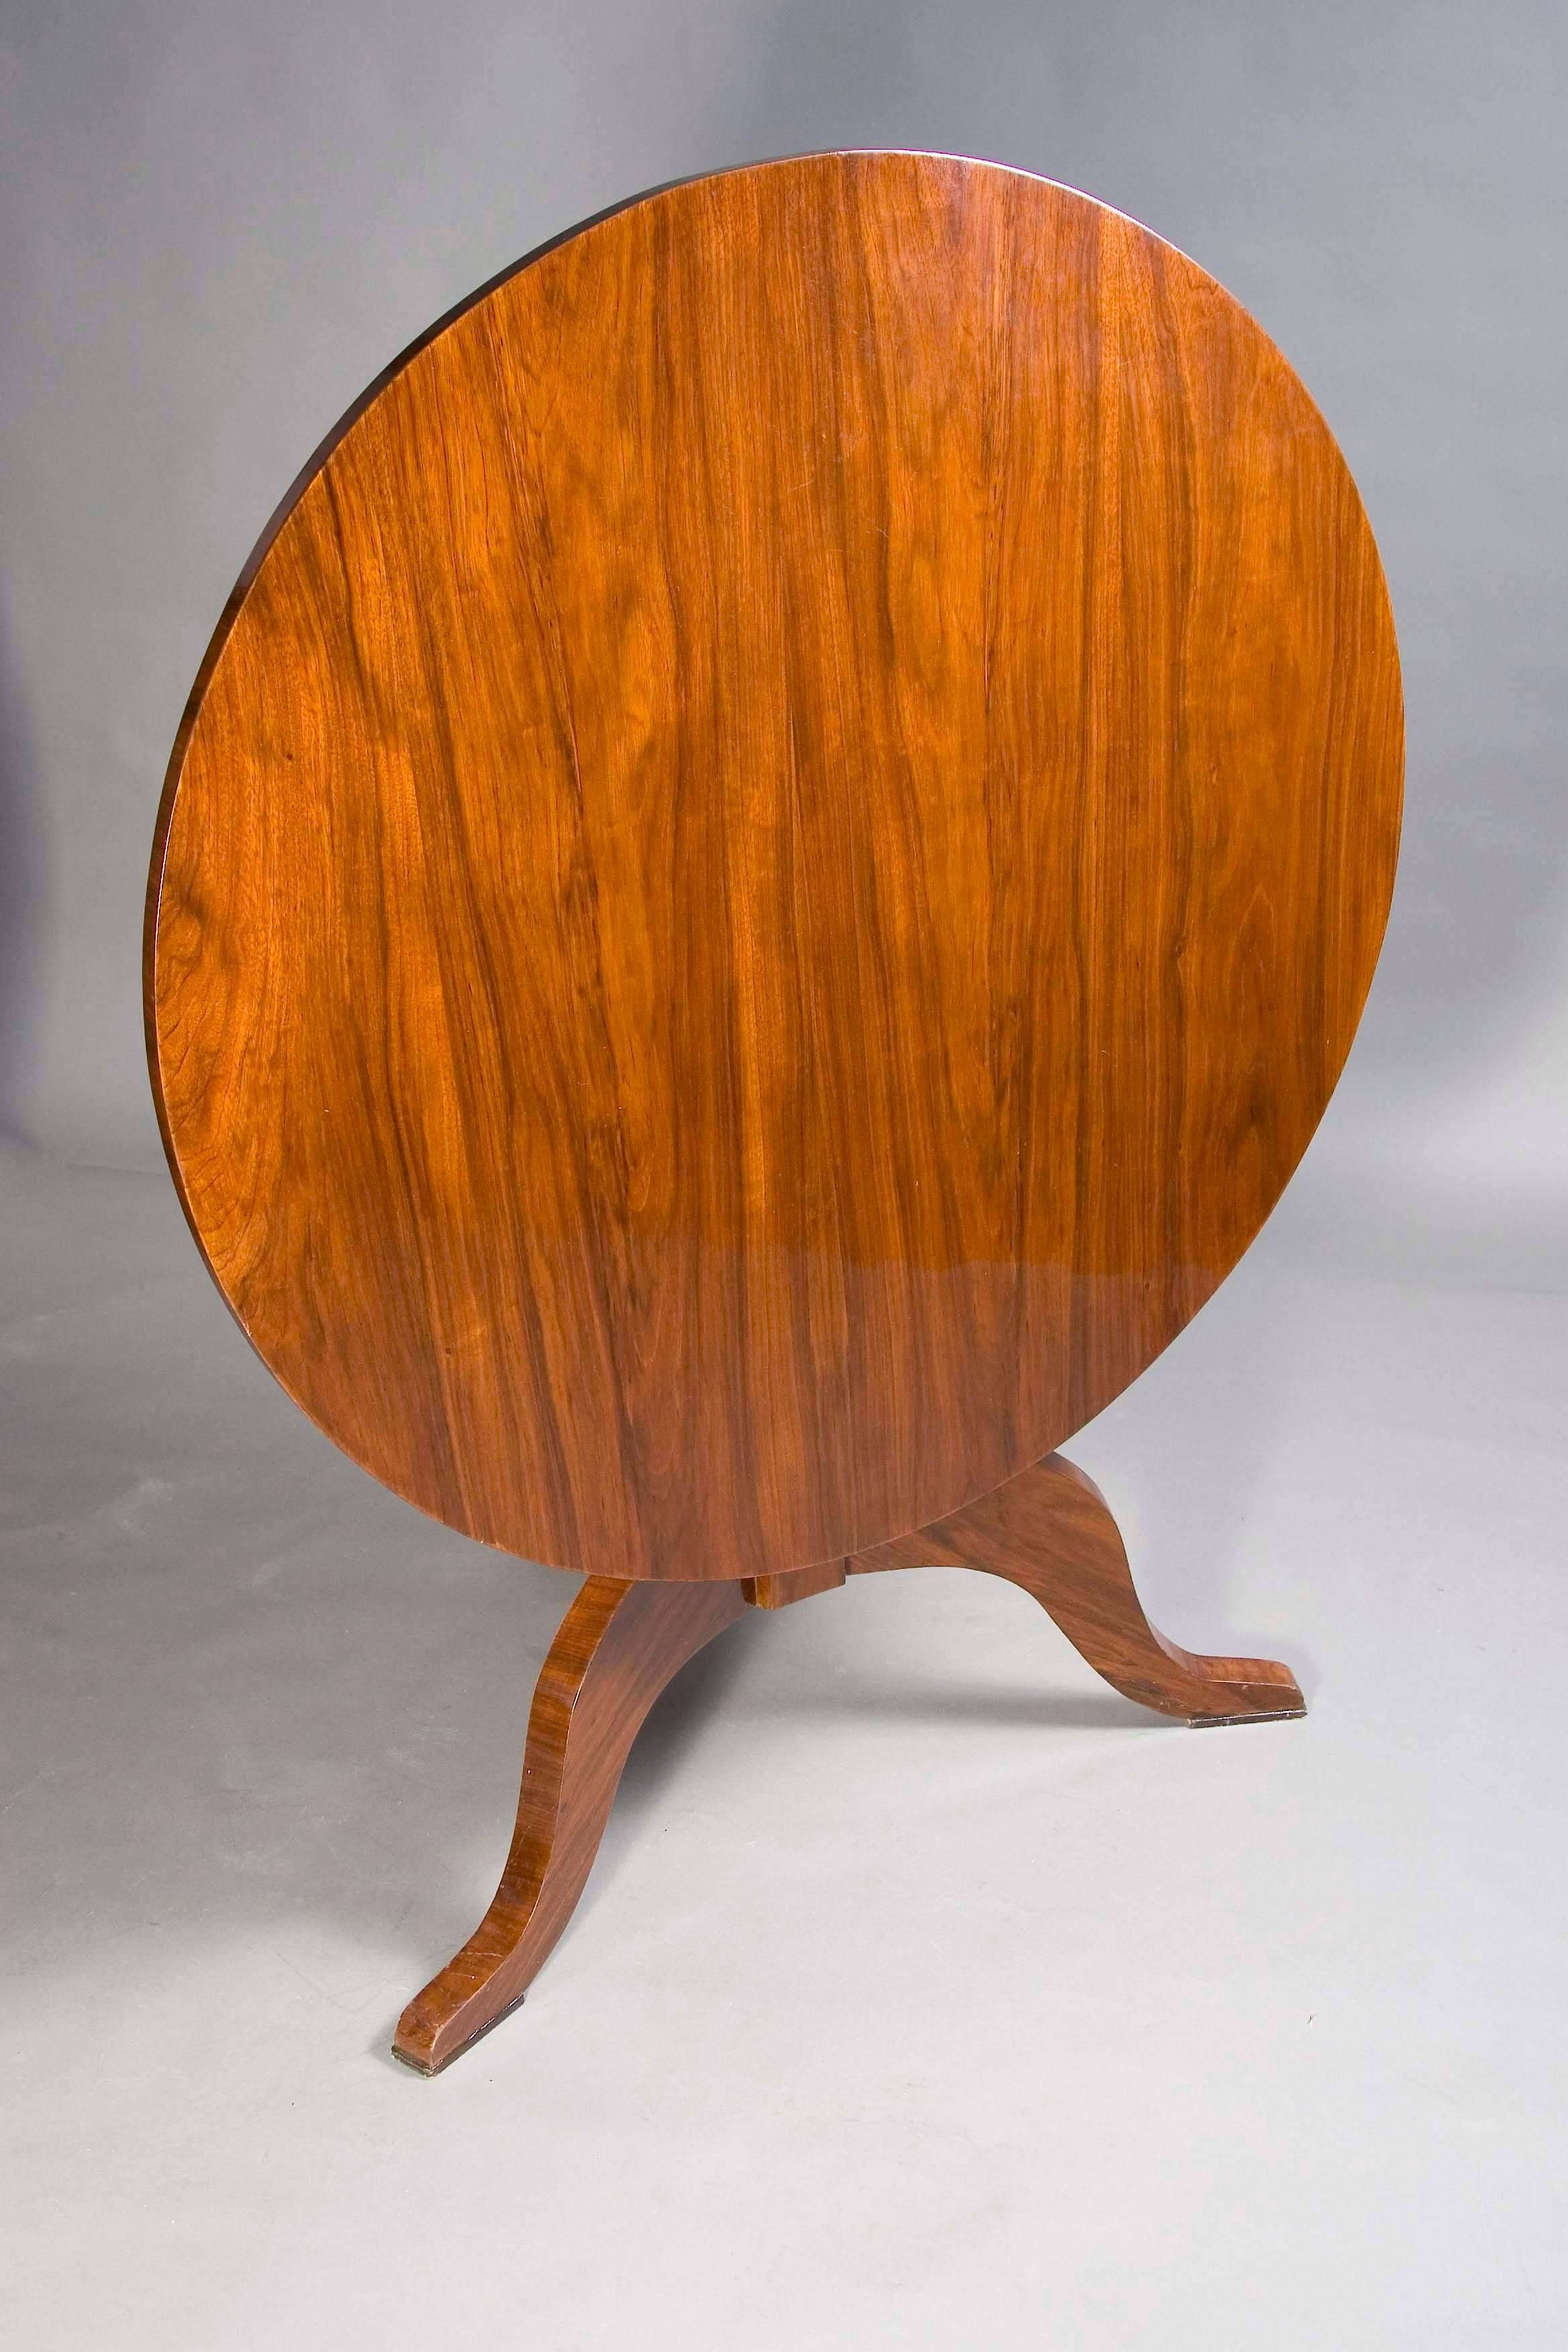 Mahogany on solid wood. Eightfold folded column shaft. Below that are three volute-shaped legs. Straight cheeks for round tabletop. A strict form of the early Biedermeier period. He is equipped with a folding mechanism. This table is very practical,